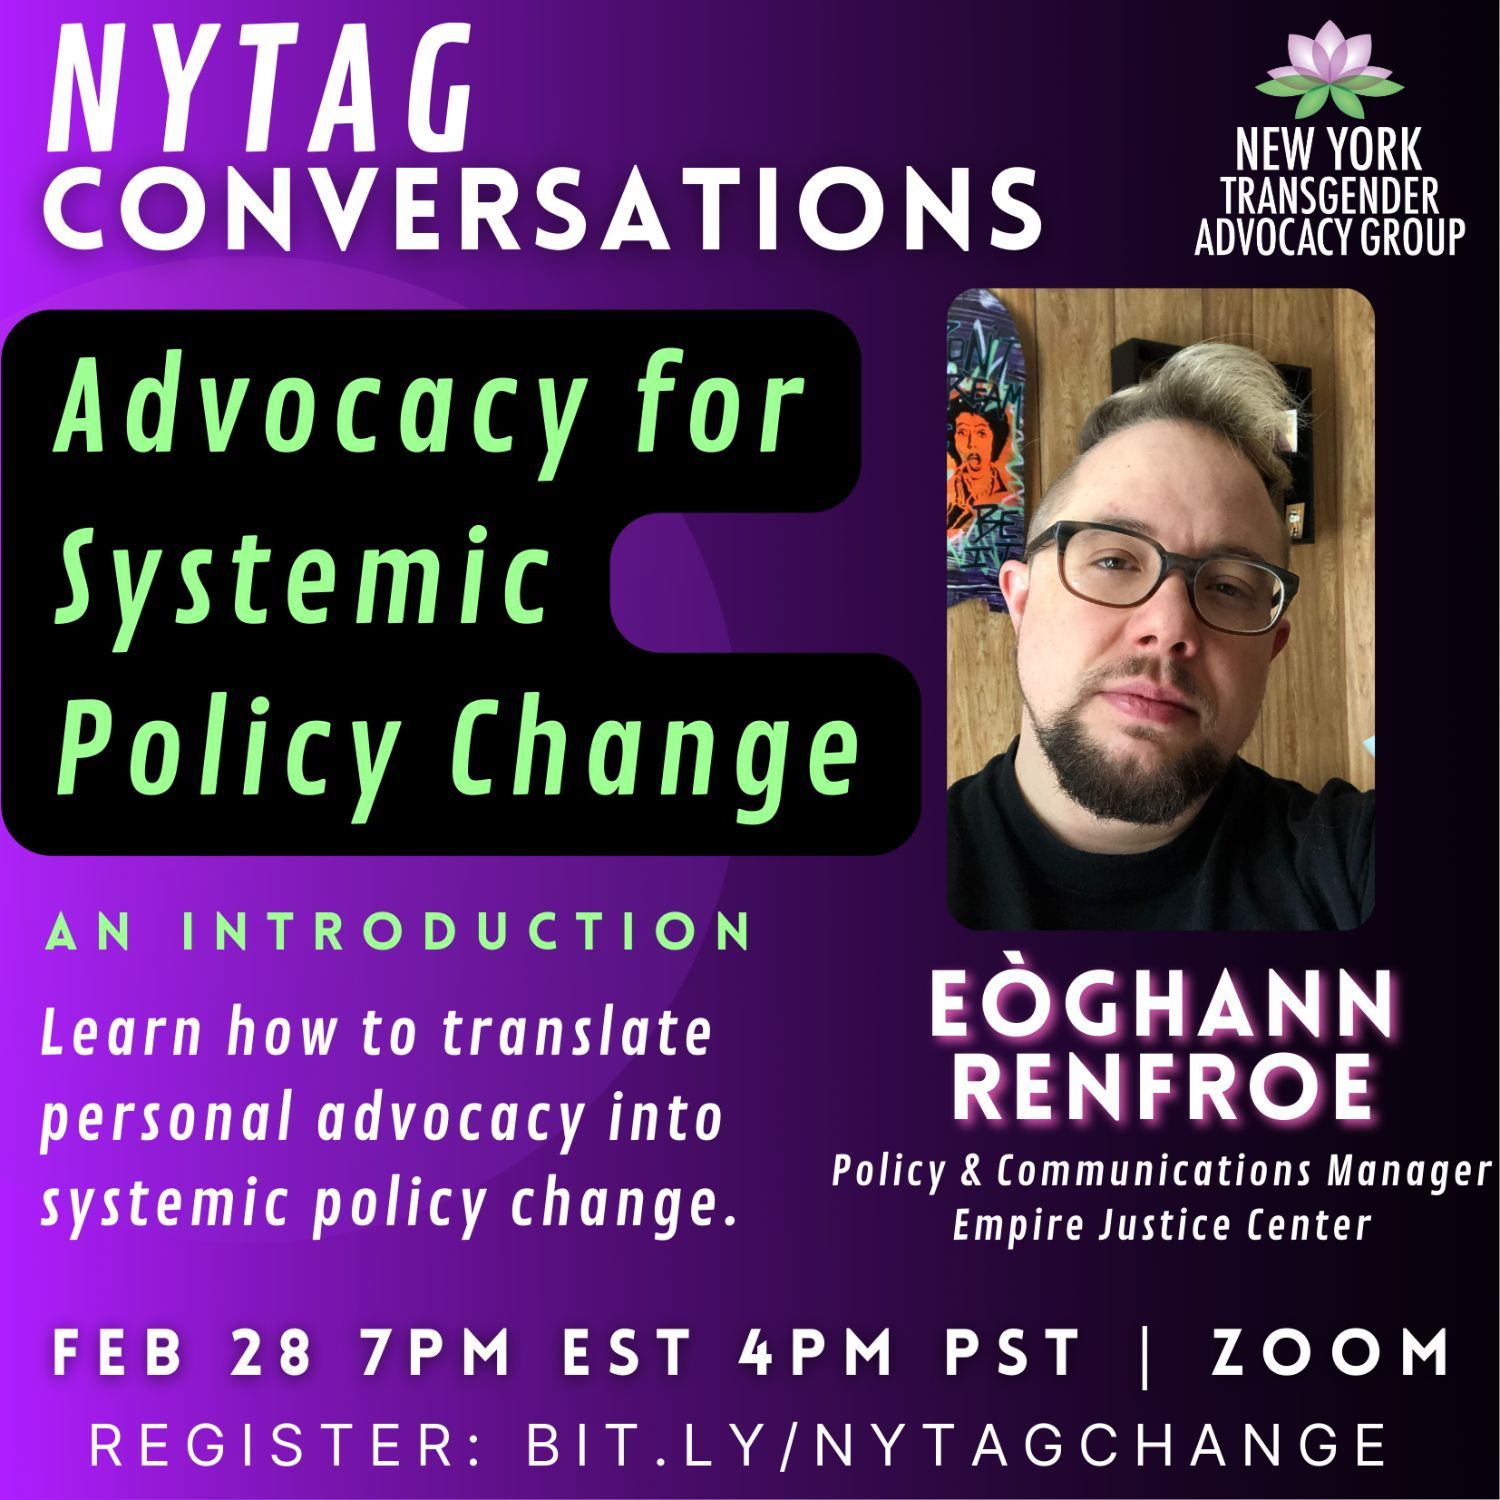 NYTAG Conversations: Advocacy for Systemic Policy Change - bit.ly/nytagchange